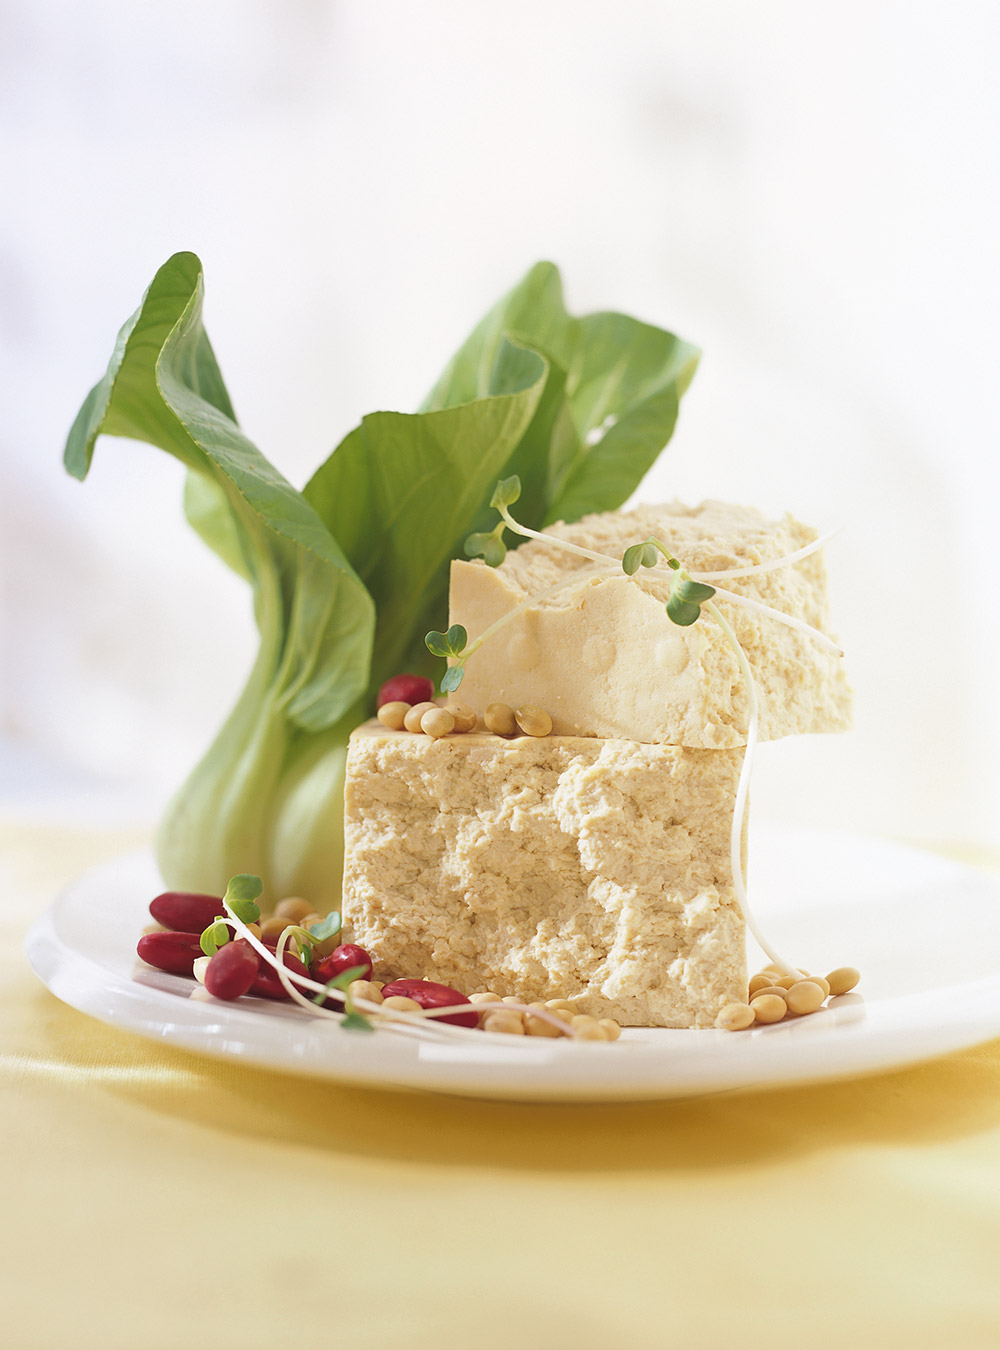 Tofu and Toasted Orzo Millefeuille